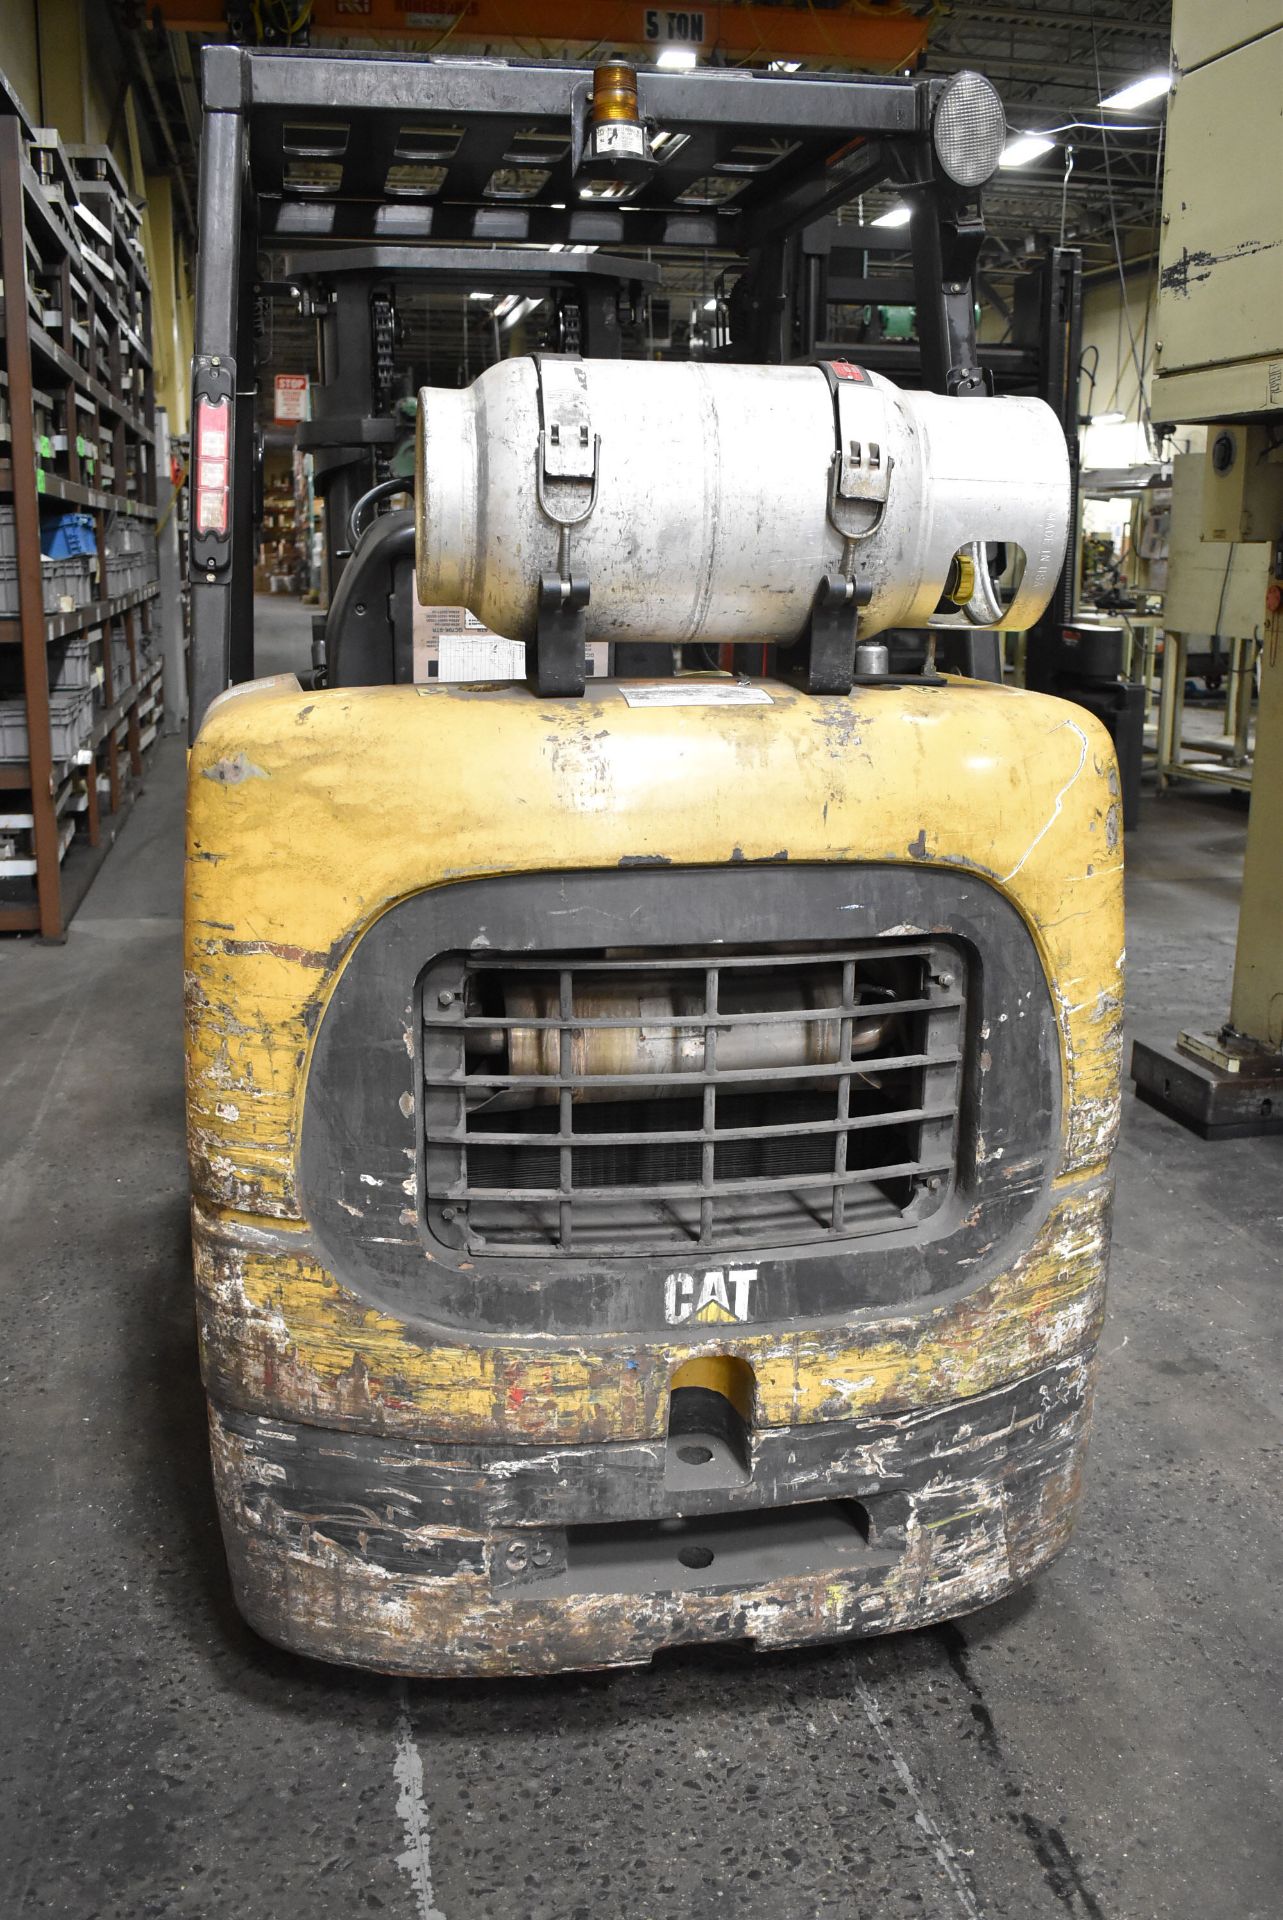 CATERPILLAR GC35K-LP 7,000 LB. LPG FORKLIFT WITH 120" MAX. LIFT HEIGHT, 2-STAGE MAST, SOLID TIRES, - Image 4 of 9